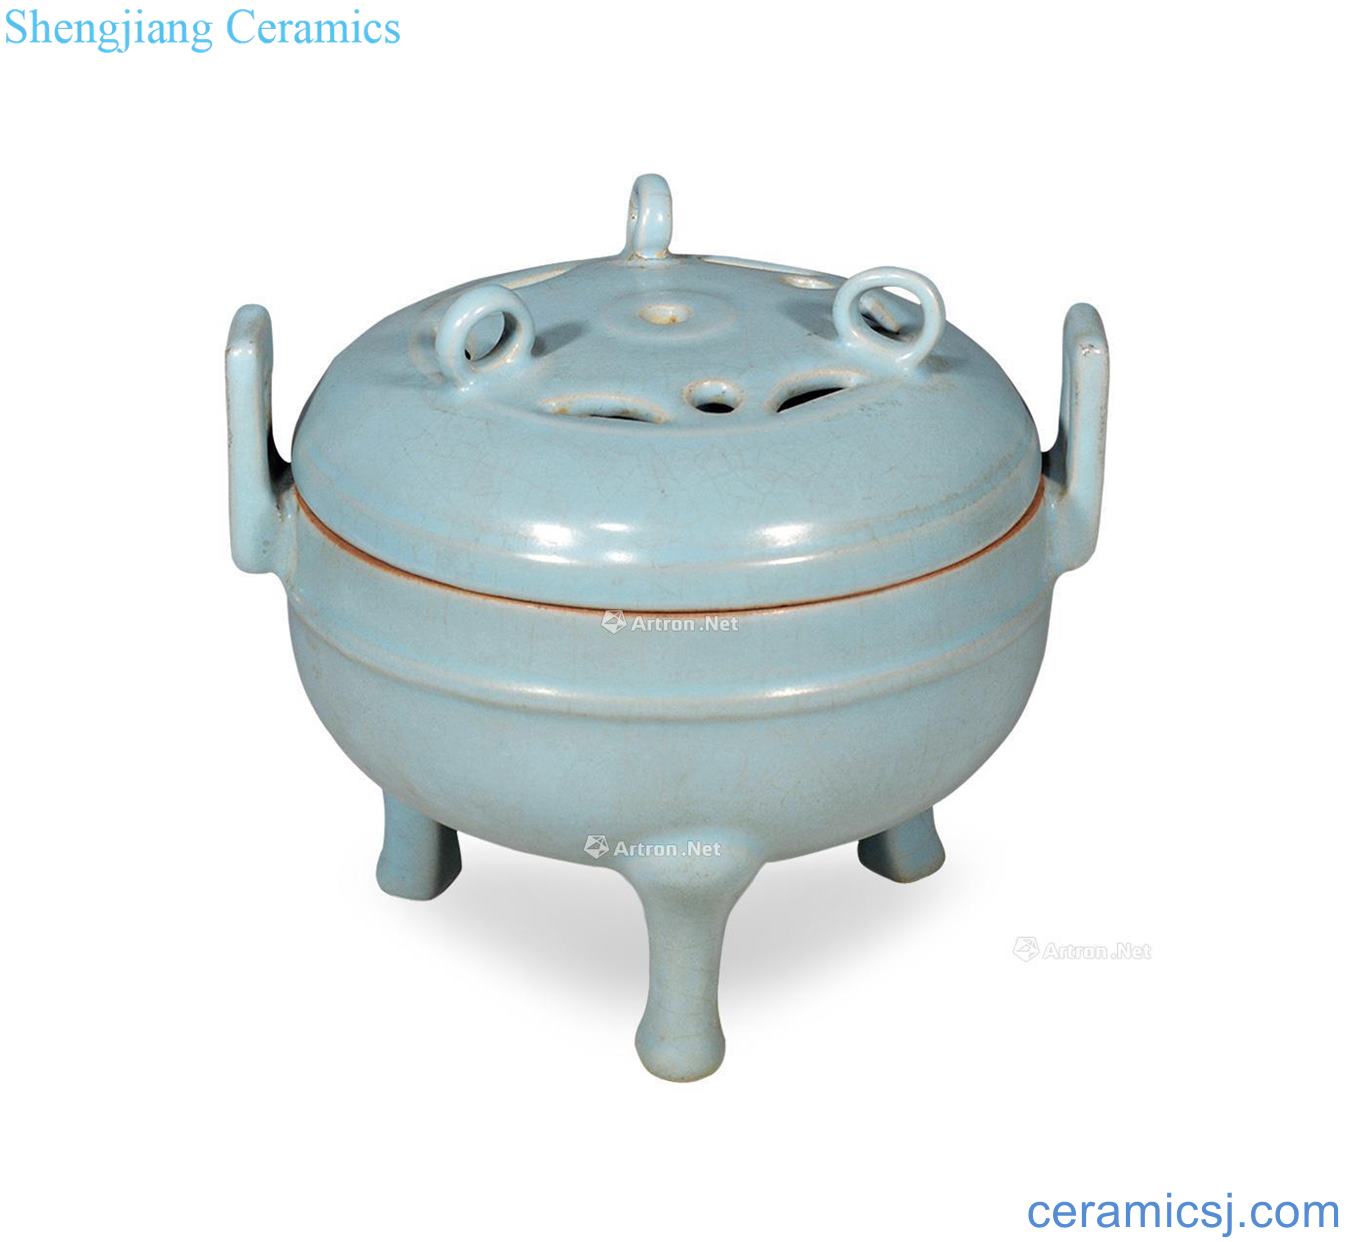 The song dynasty Your kiln furnace with three legs